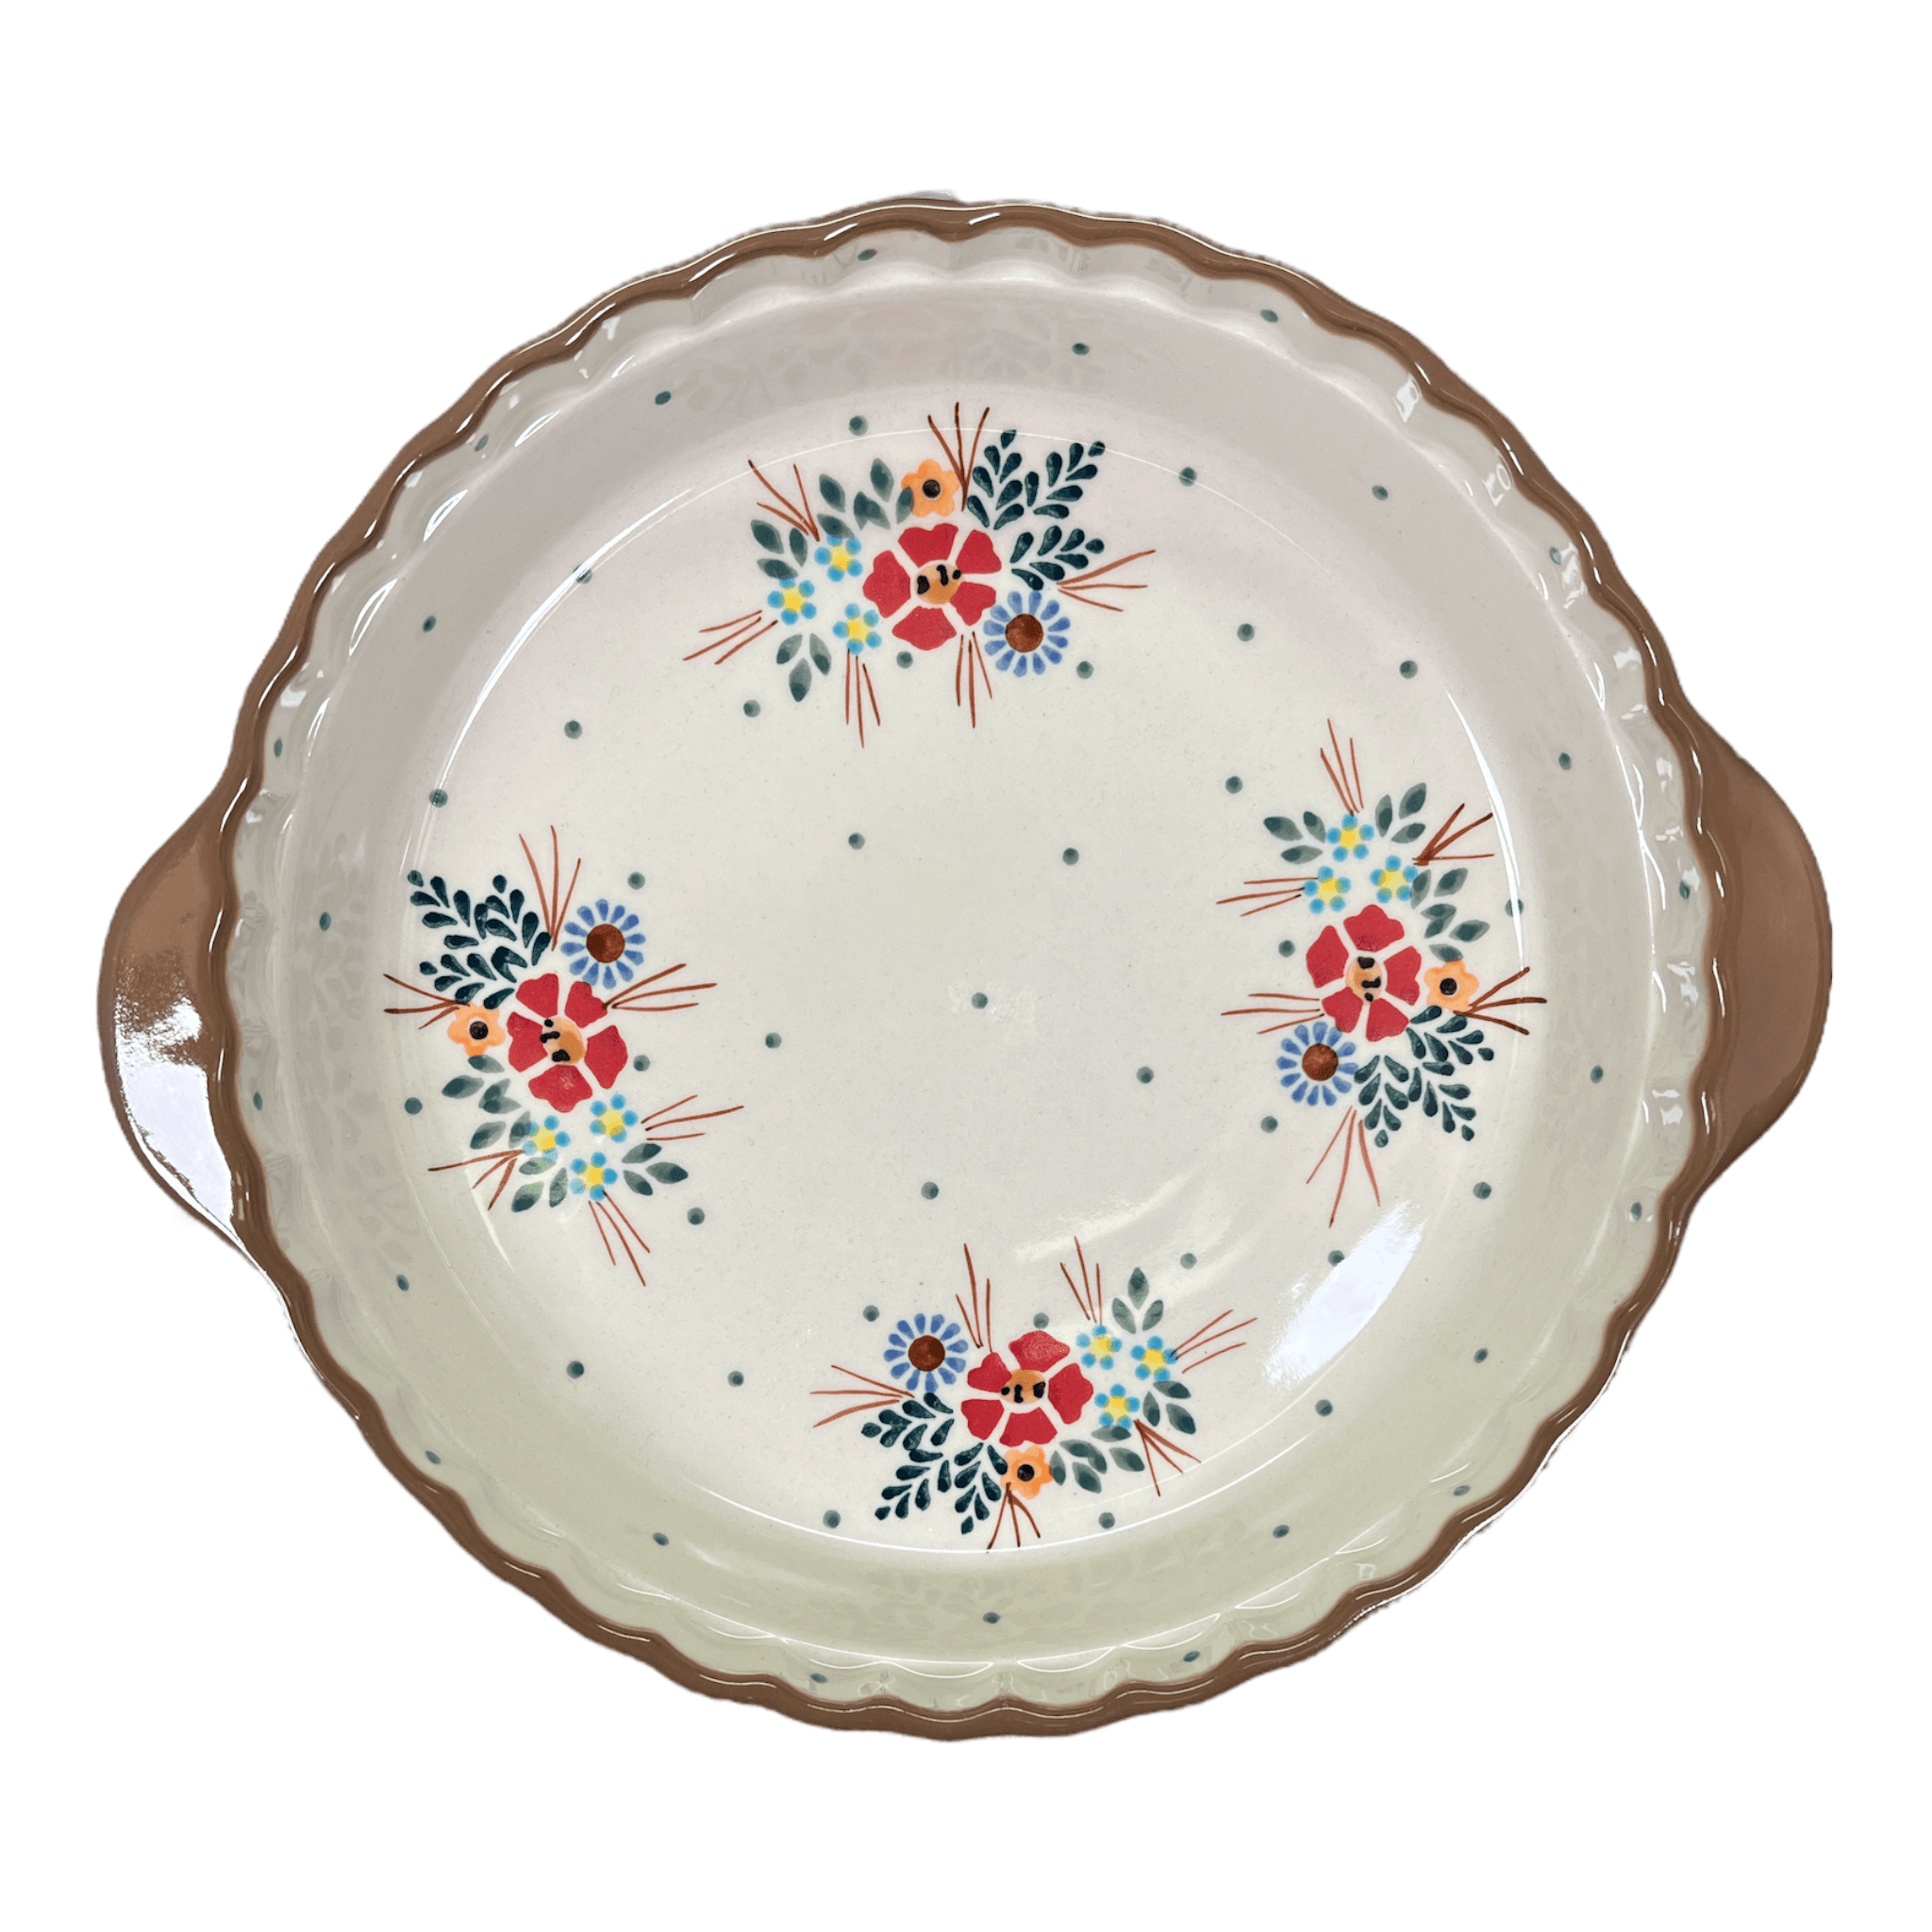 World® Tableware CIS-17 Cast Iron 7.5 Pie Plate with Handles